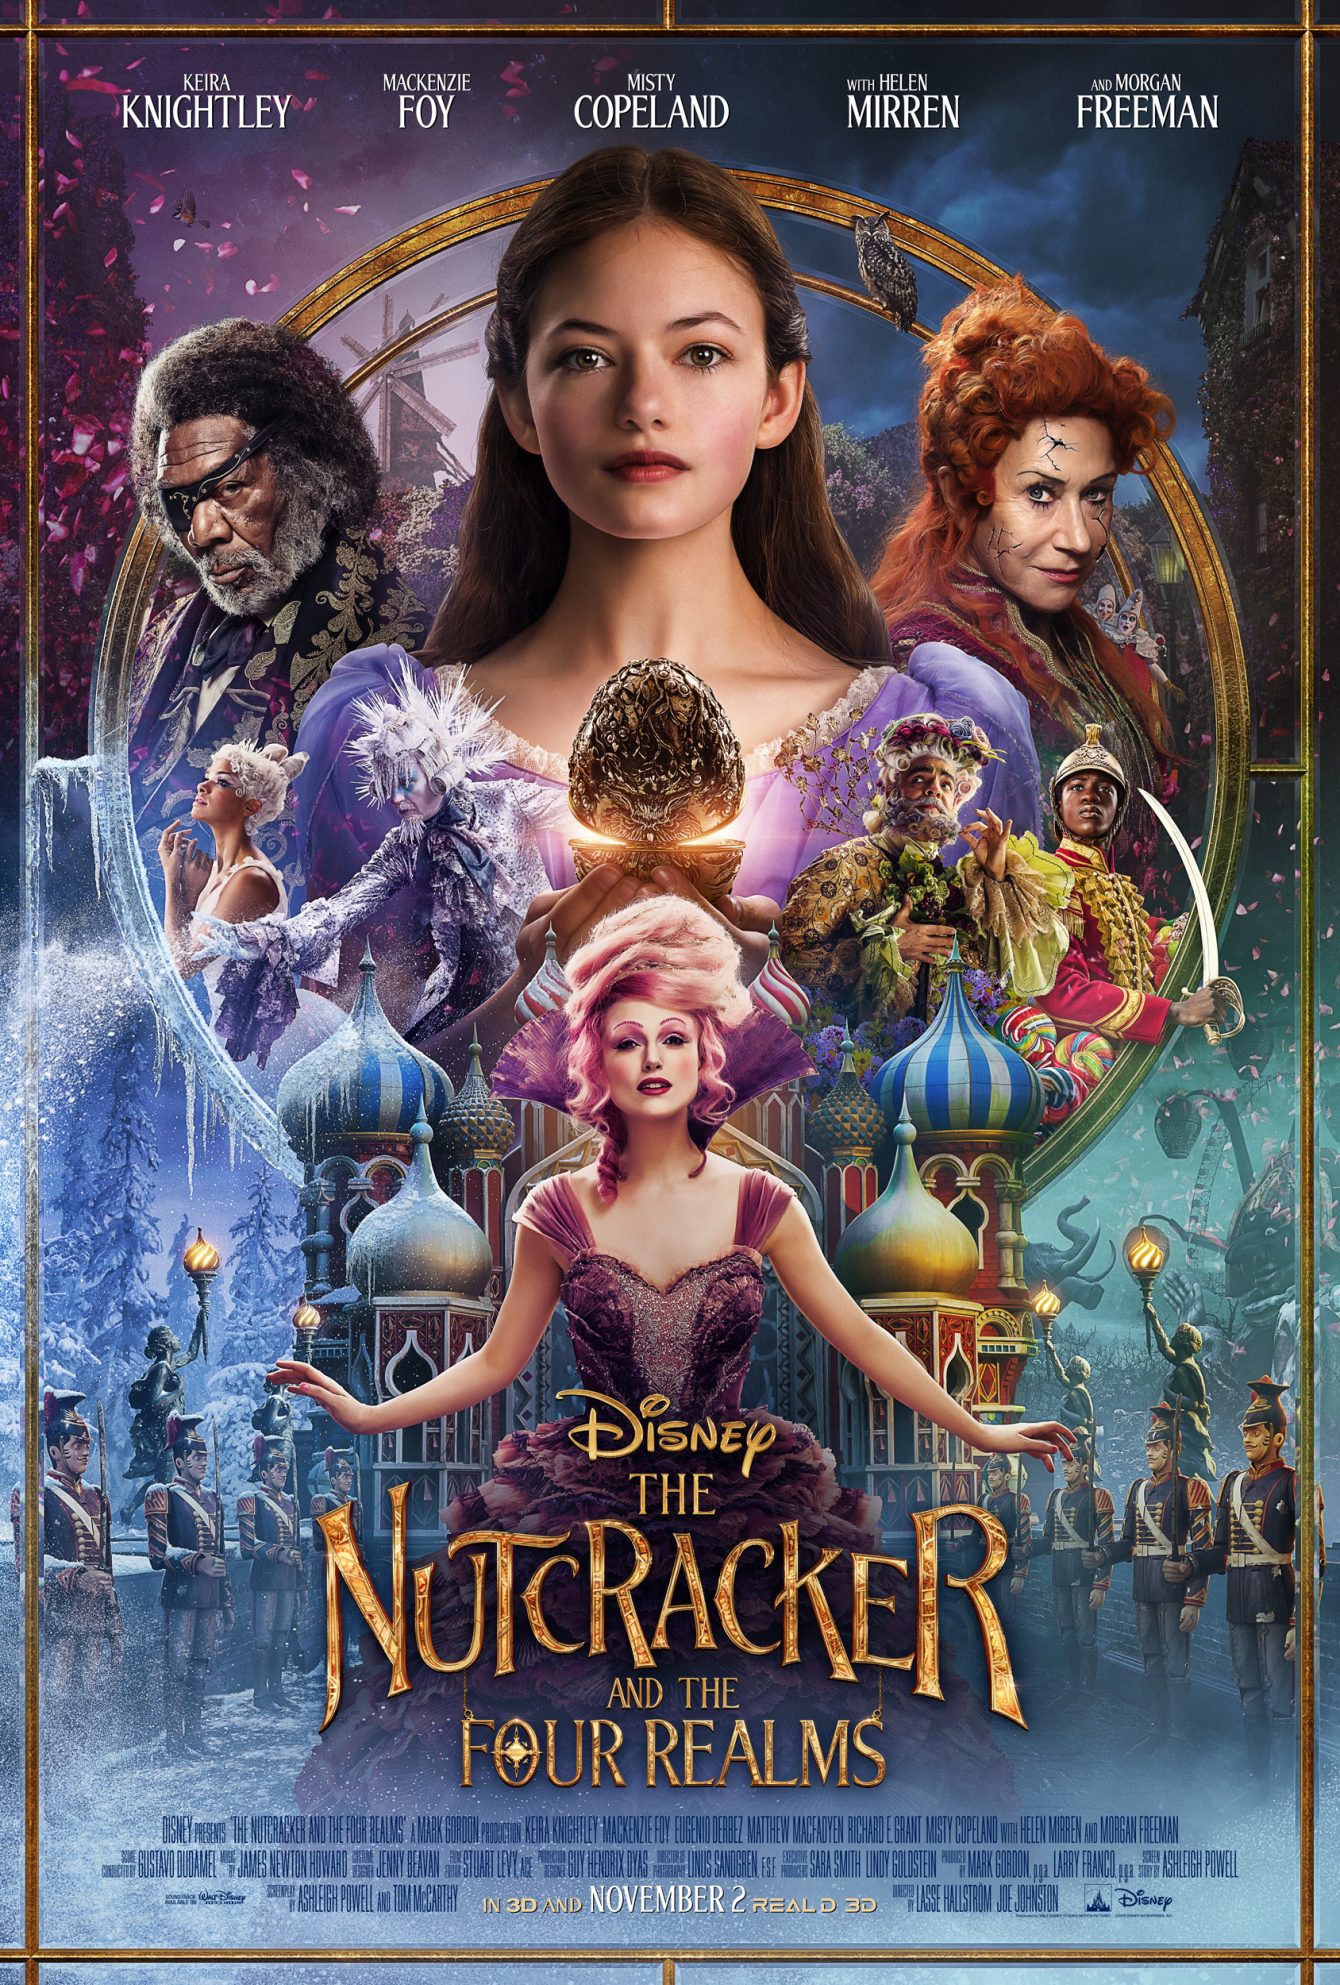 Nutcracker and the Four Realms Poster